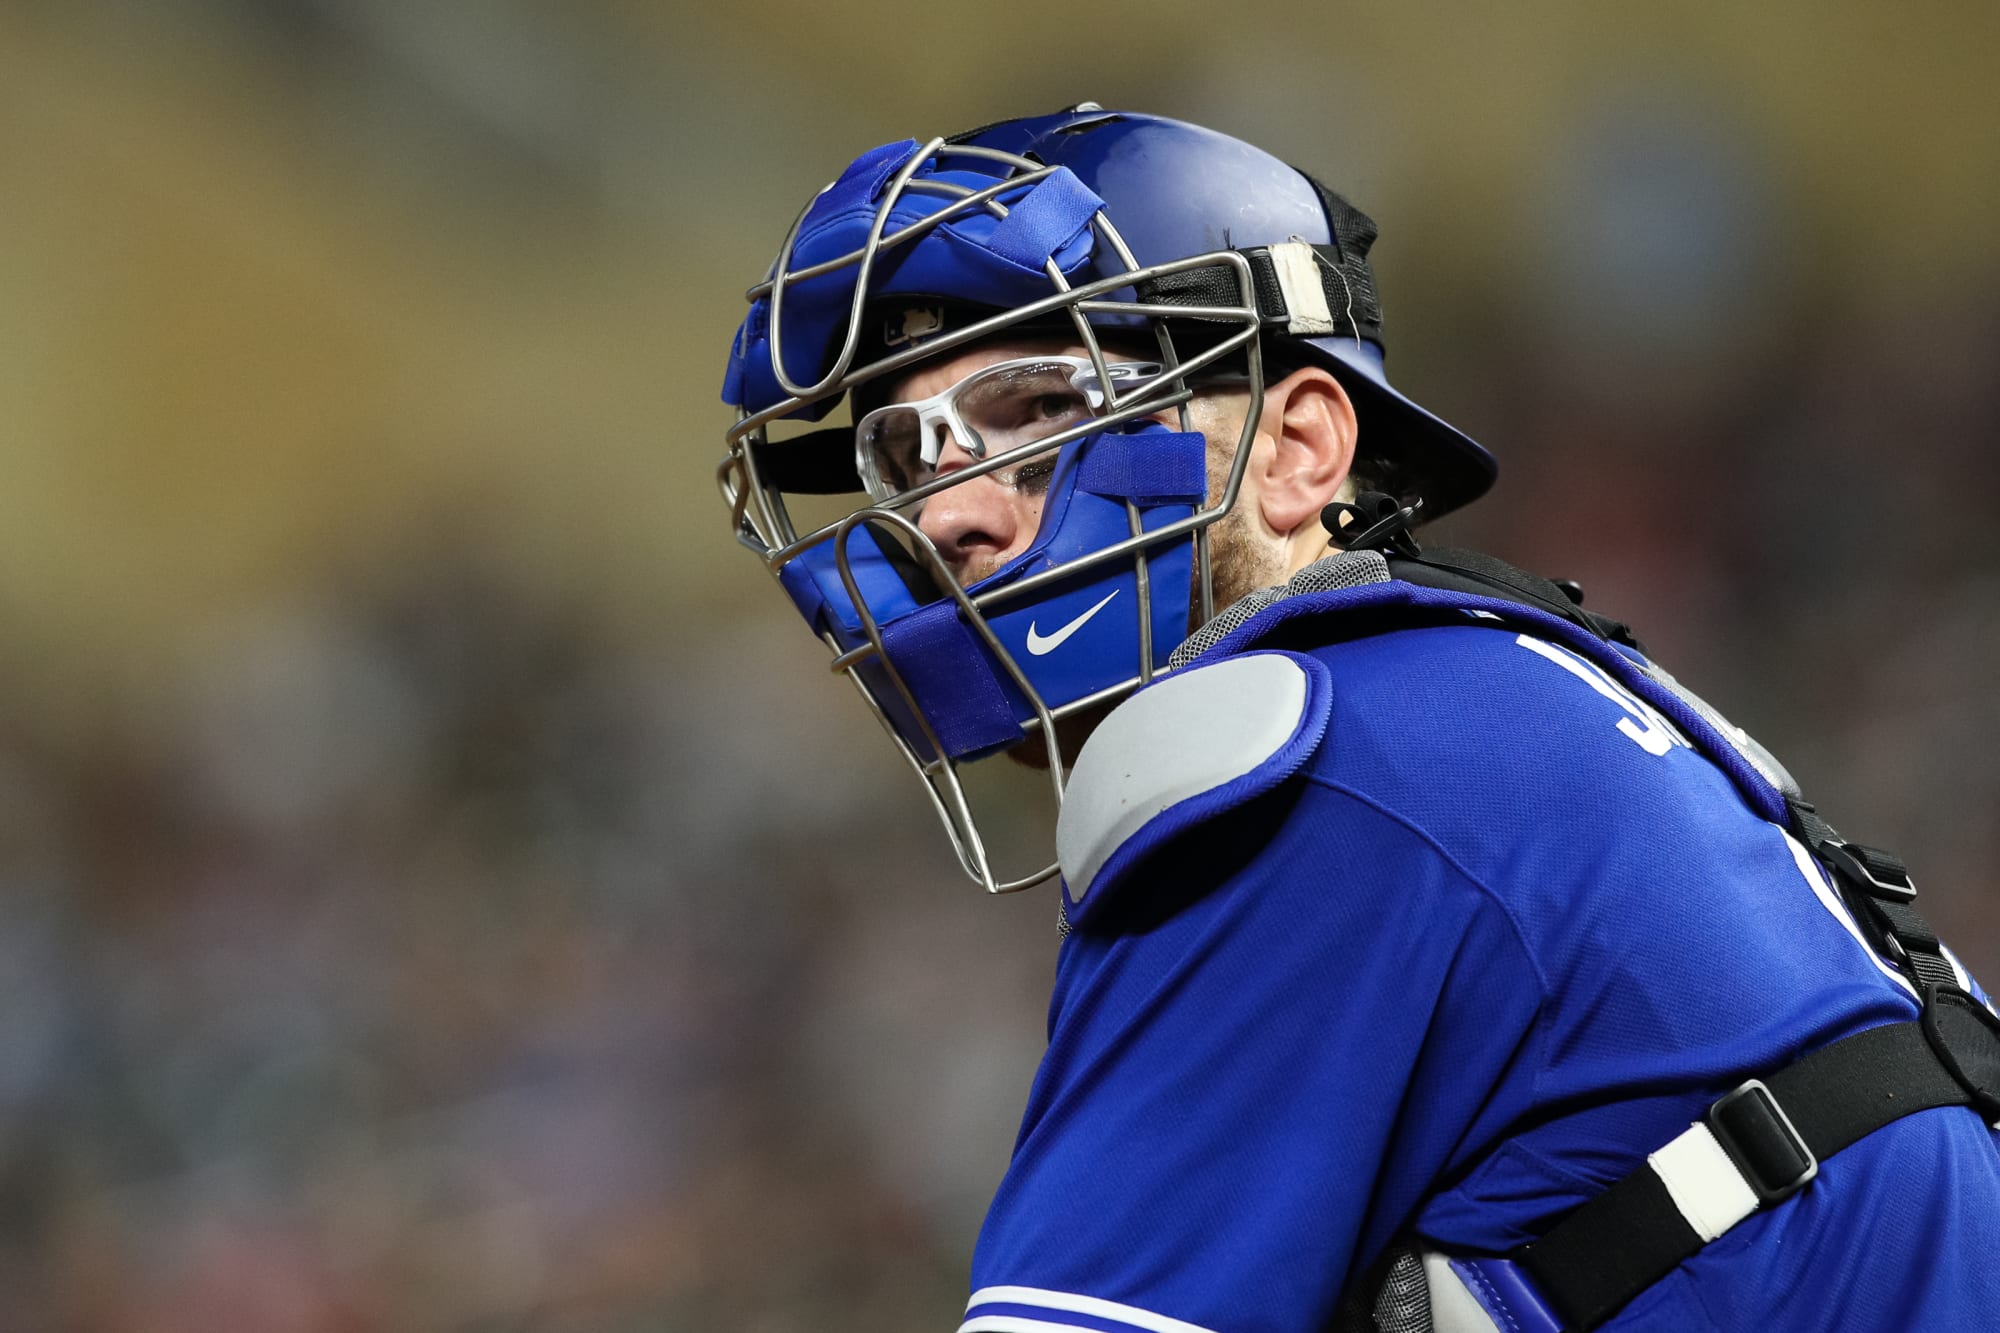 Blue Jays: An elite combined effort from the catching duo | Flipboard